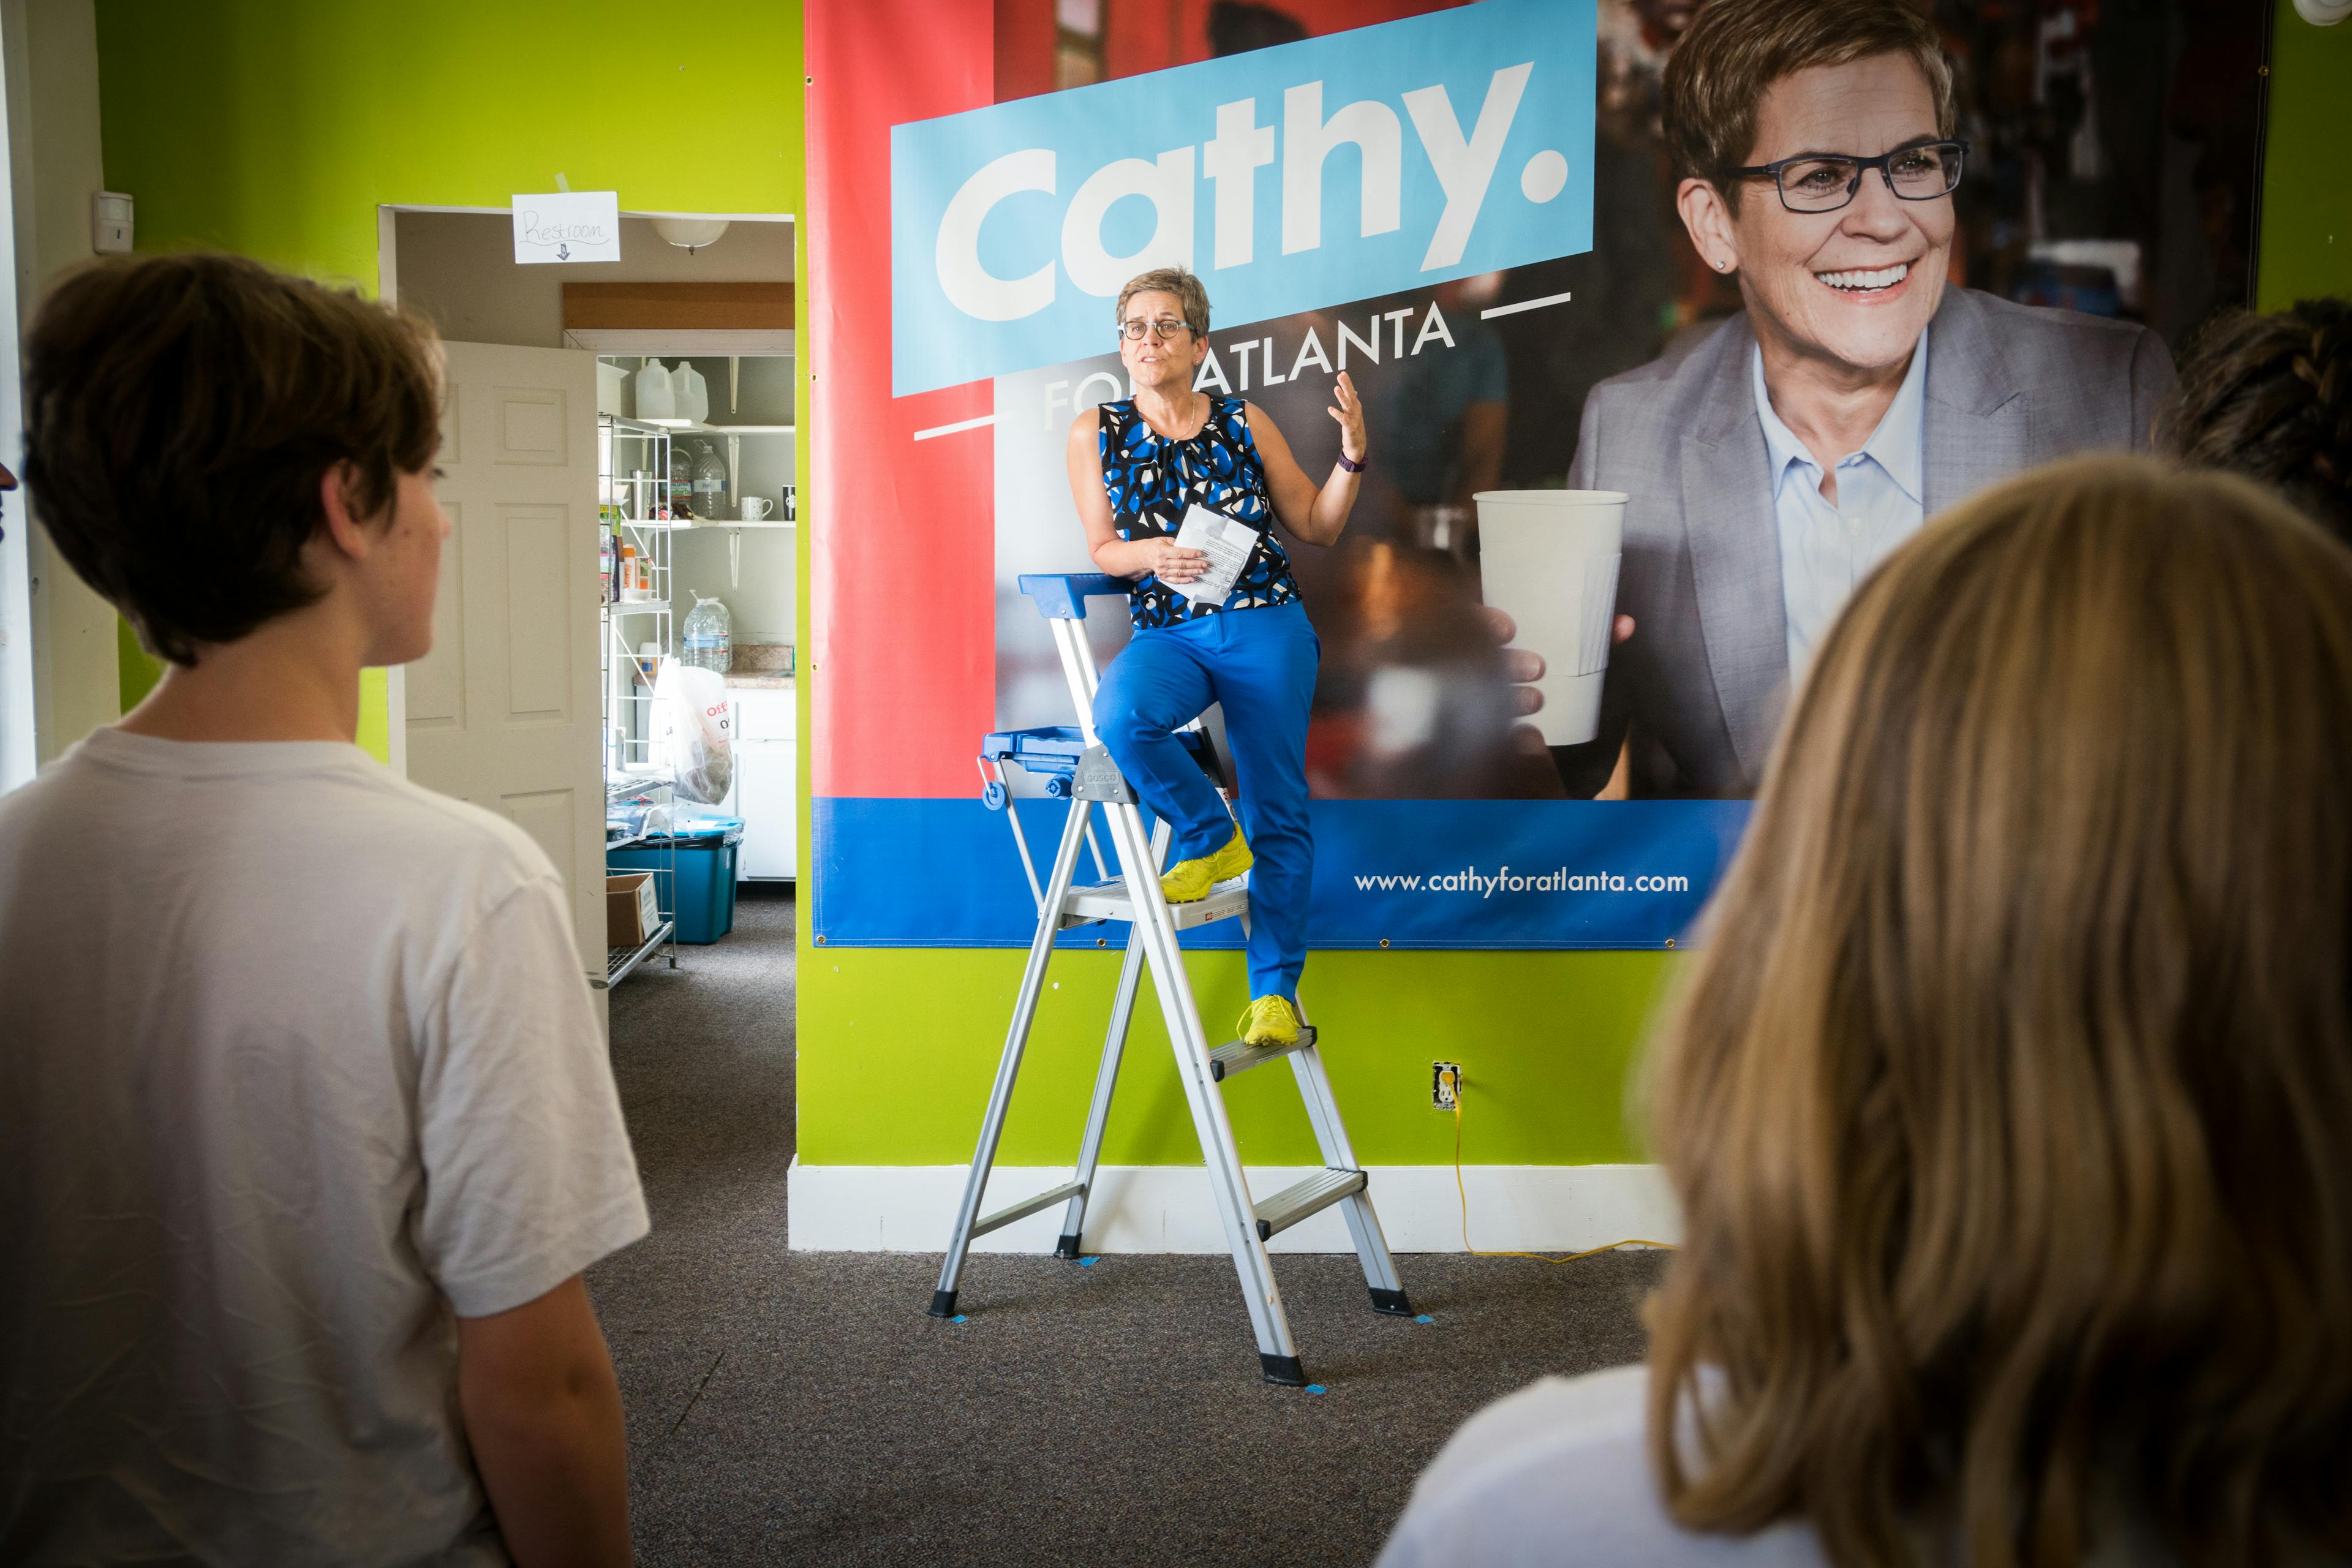 Atlanta mayoral candidate Cathy Woolard speaking from a ladder at the opening of her campaign office